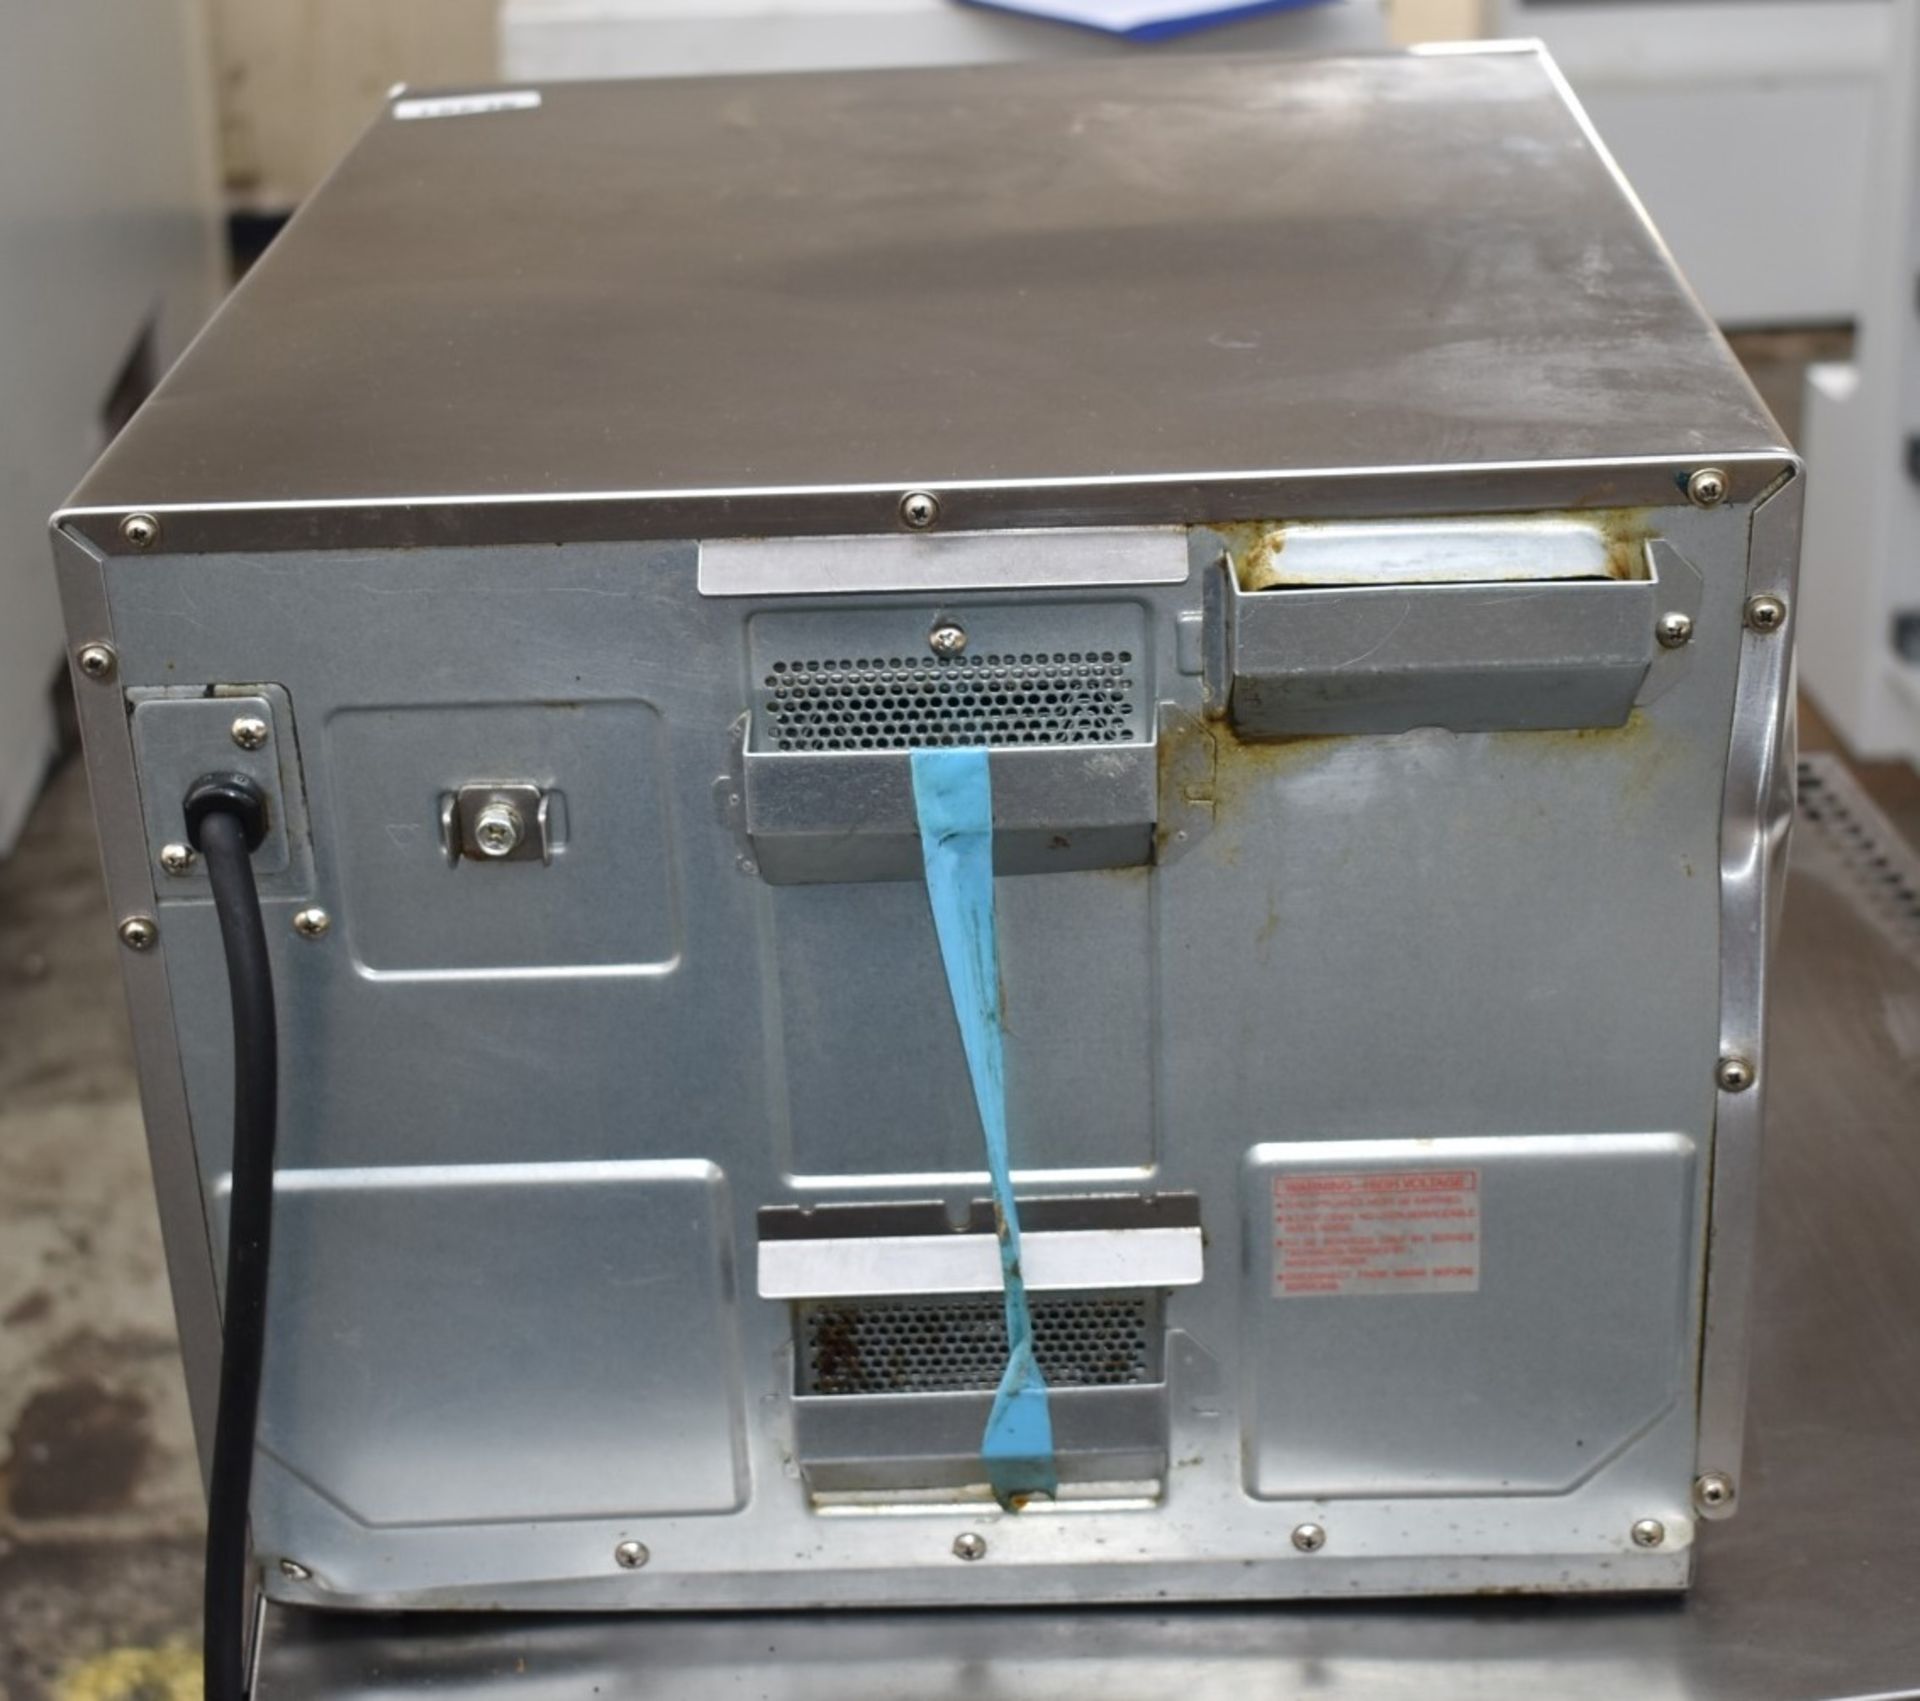 1 x Panasonic Commercial Microwave Oven With Stainless Steel Exterior - Recently Removed From - Image 5 of 6